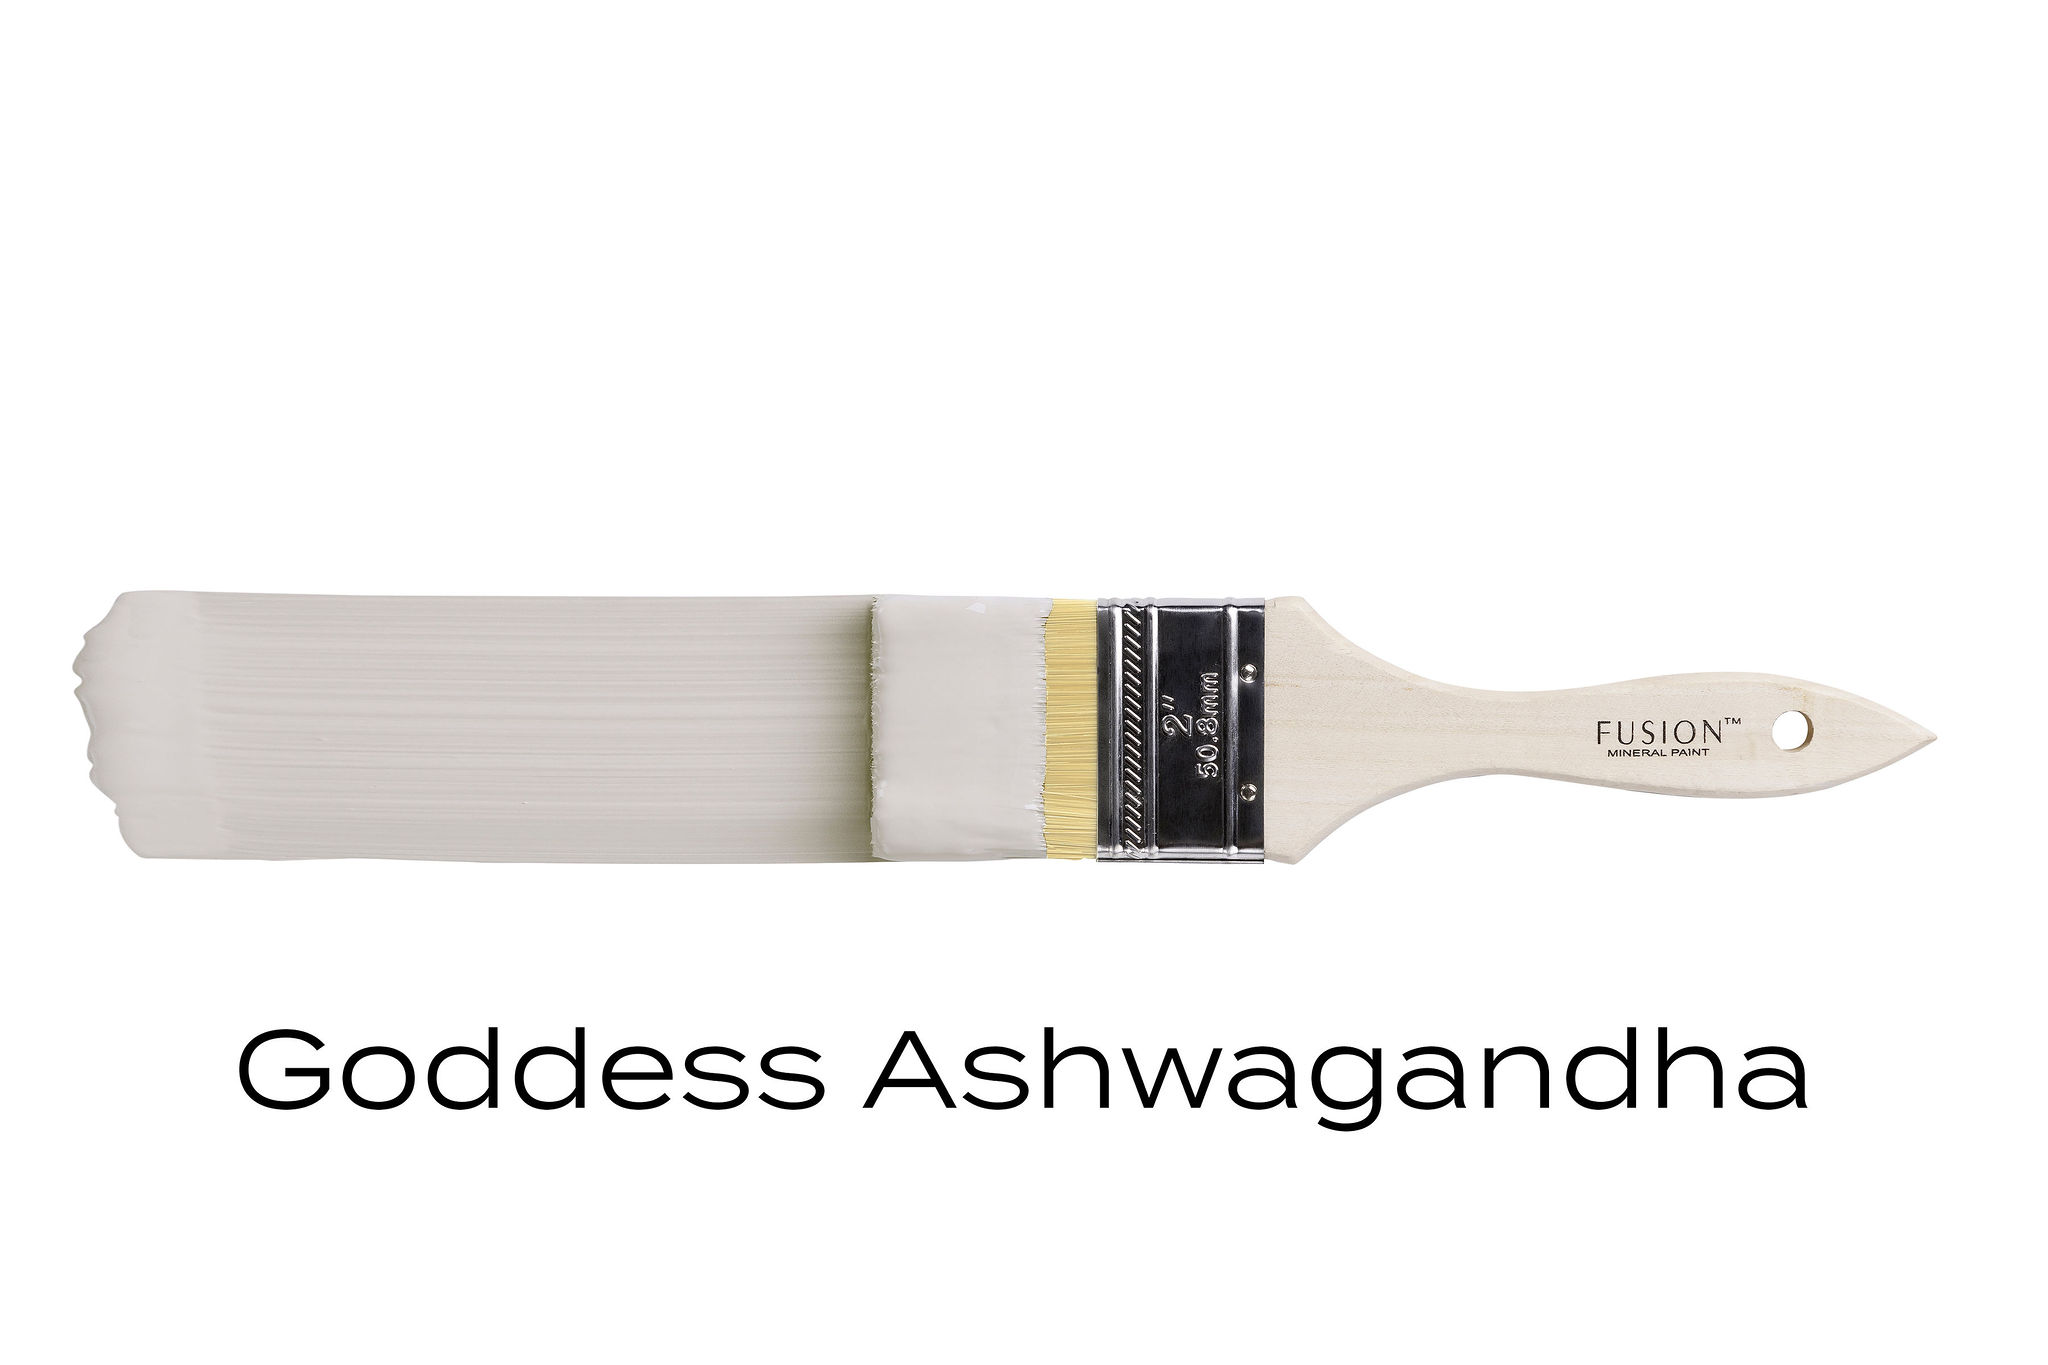 Goddess Ashwagandha Fusion Mineral Paint Goed Gestyled Brielle